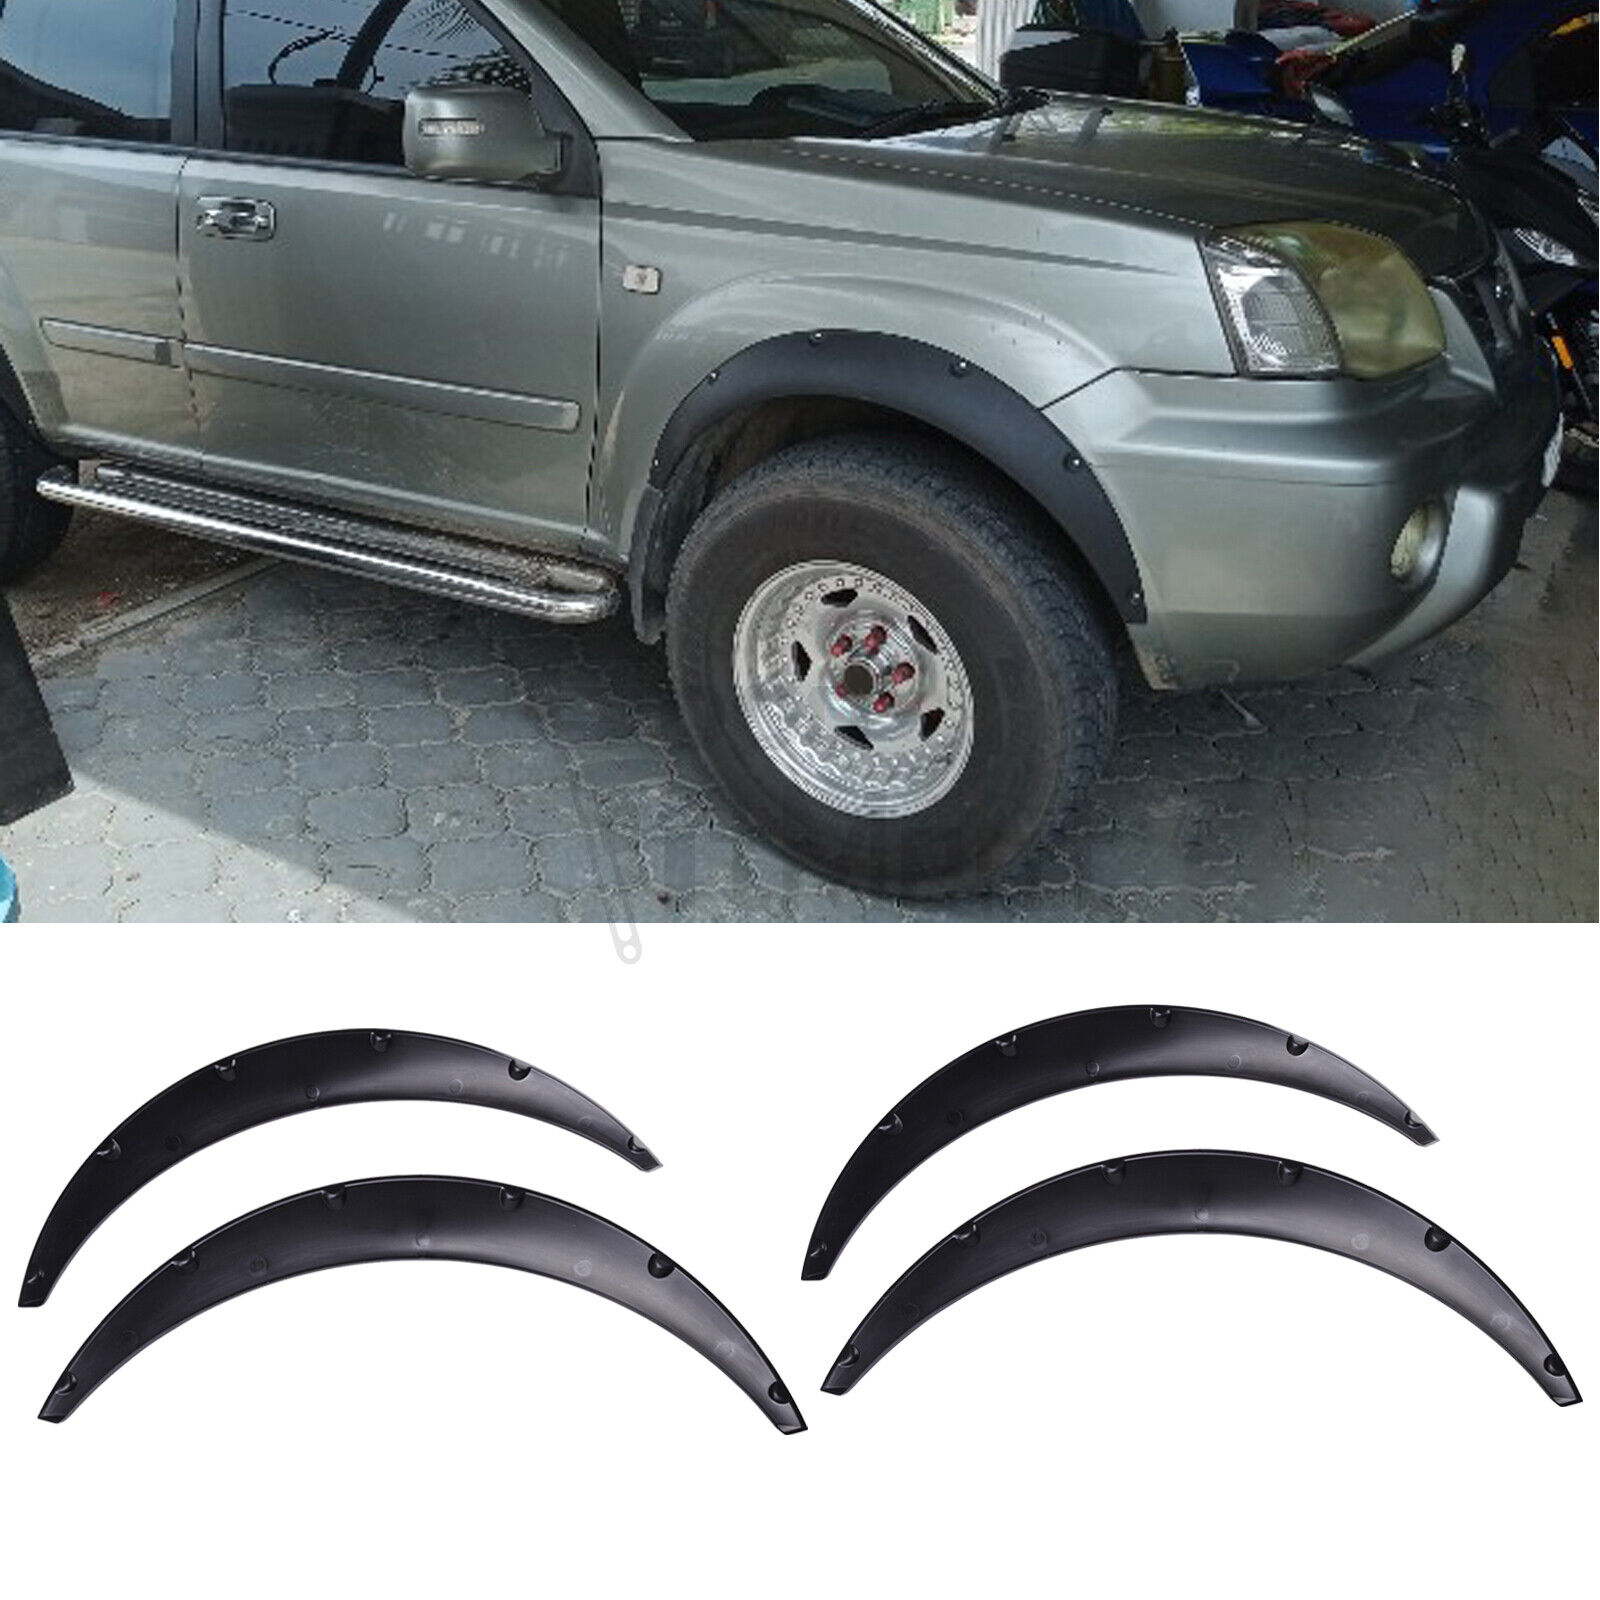 4PCS Universal Fender Flares Extra Wide Body Kit Wheel Arches 3.5\'\' 4.5\